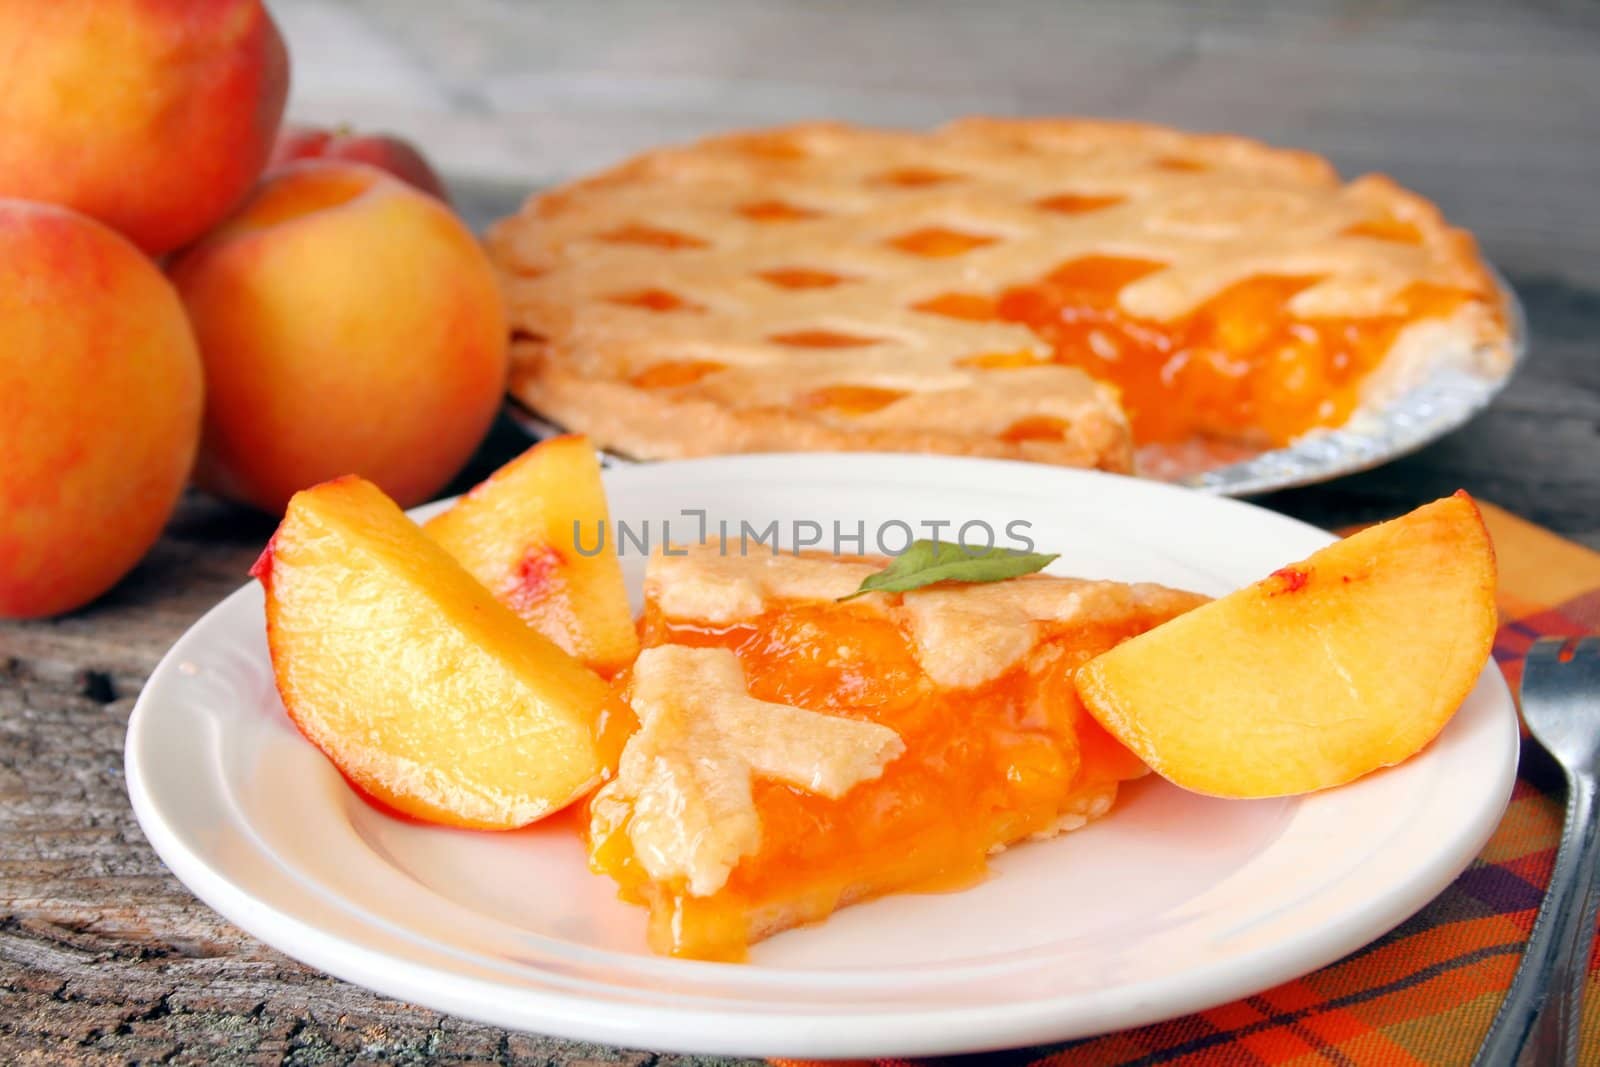 A slice of peach pie, with the pie in the background, and fresh peaches top the image off.